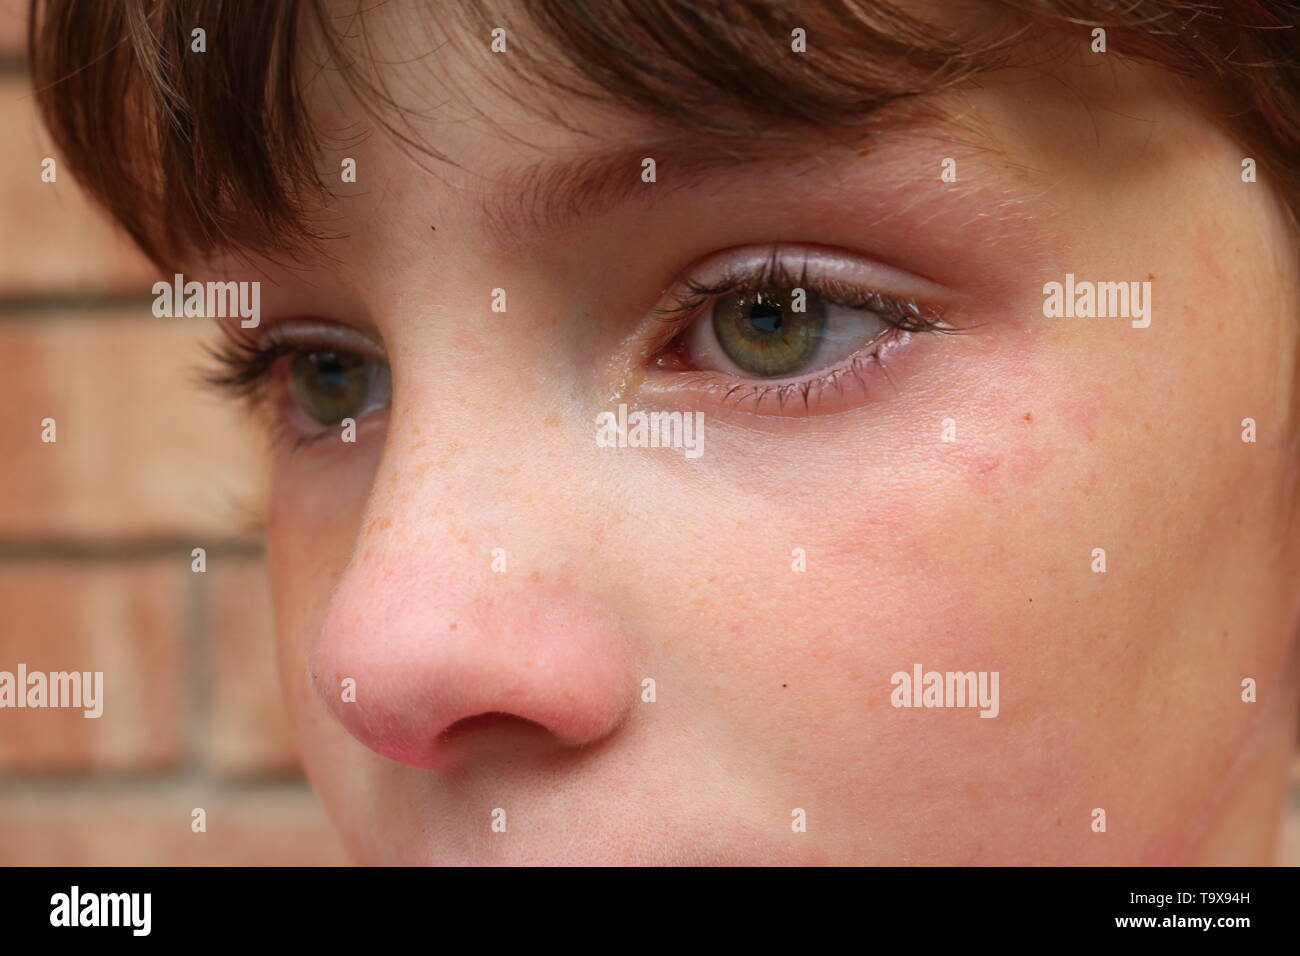 Closeup of young upset child with green eyes and a red nose with a tear in eye Stock Photo